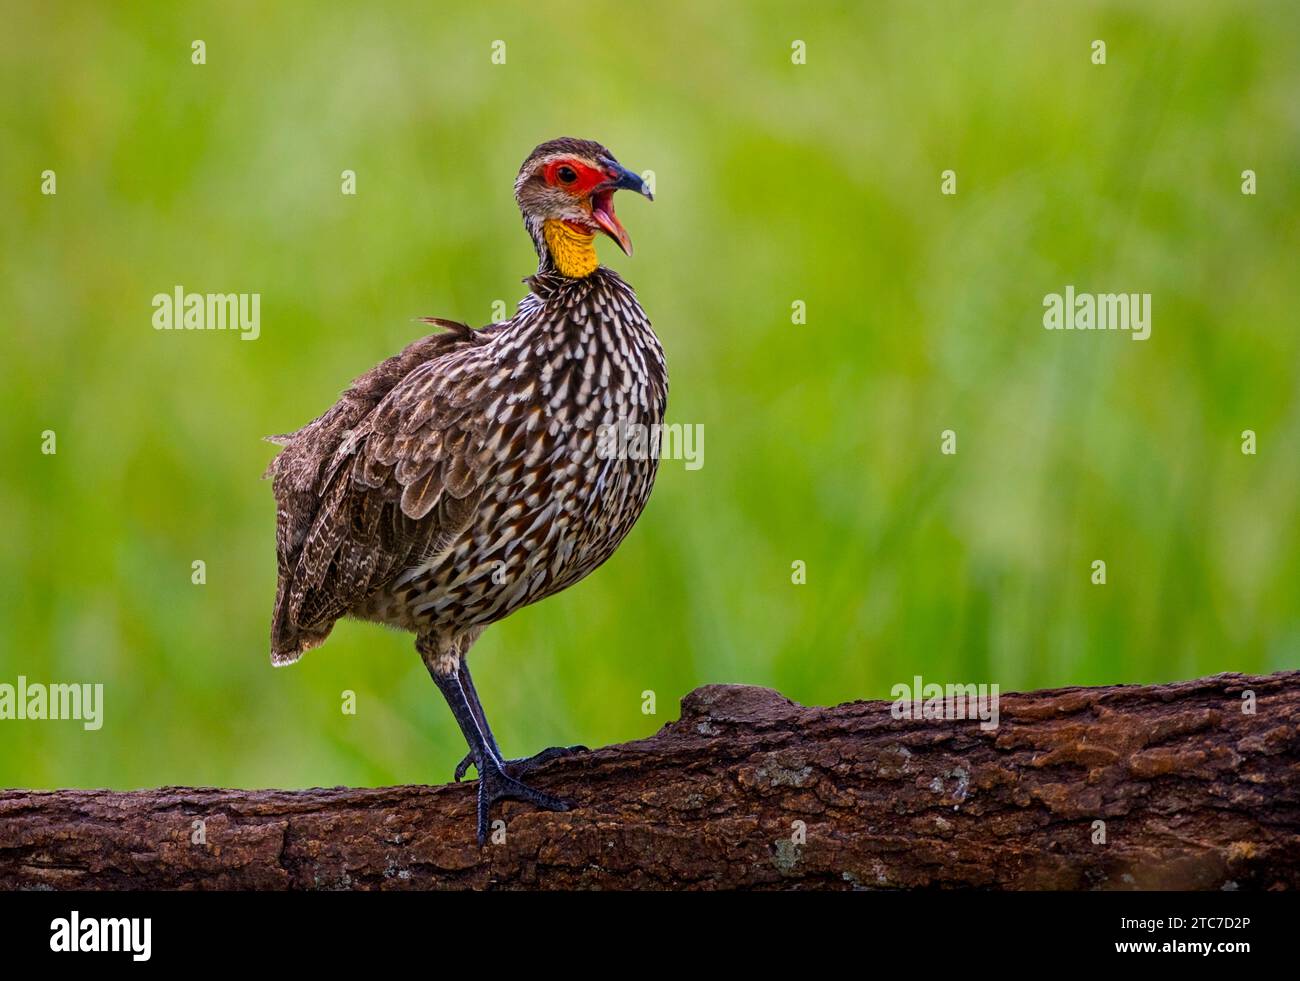 The yellow-necked spurfowl or yellow-necked francolin (Pternistis leucoscepus syn Francolinus leucoscepus) is a species of bird in the family Phasiani Stock Photo